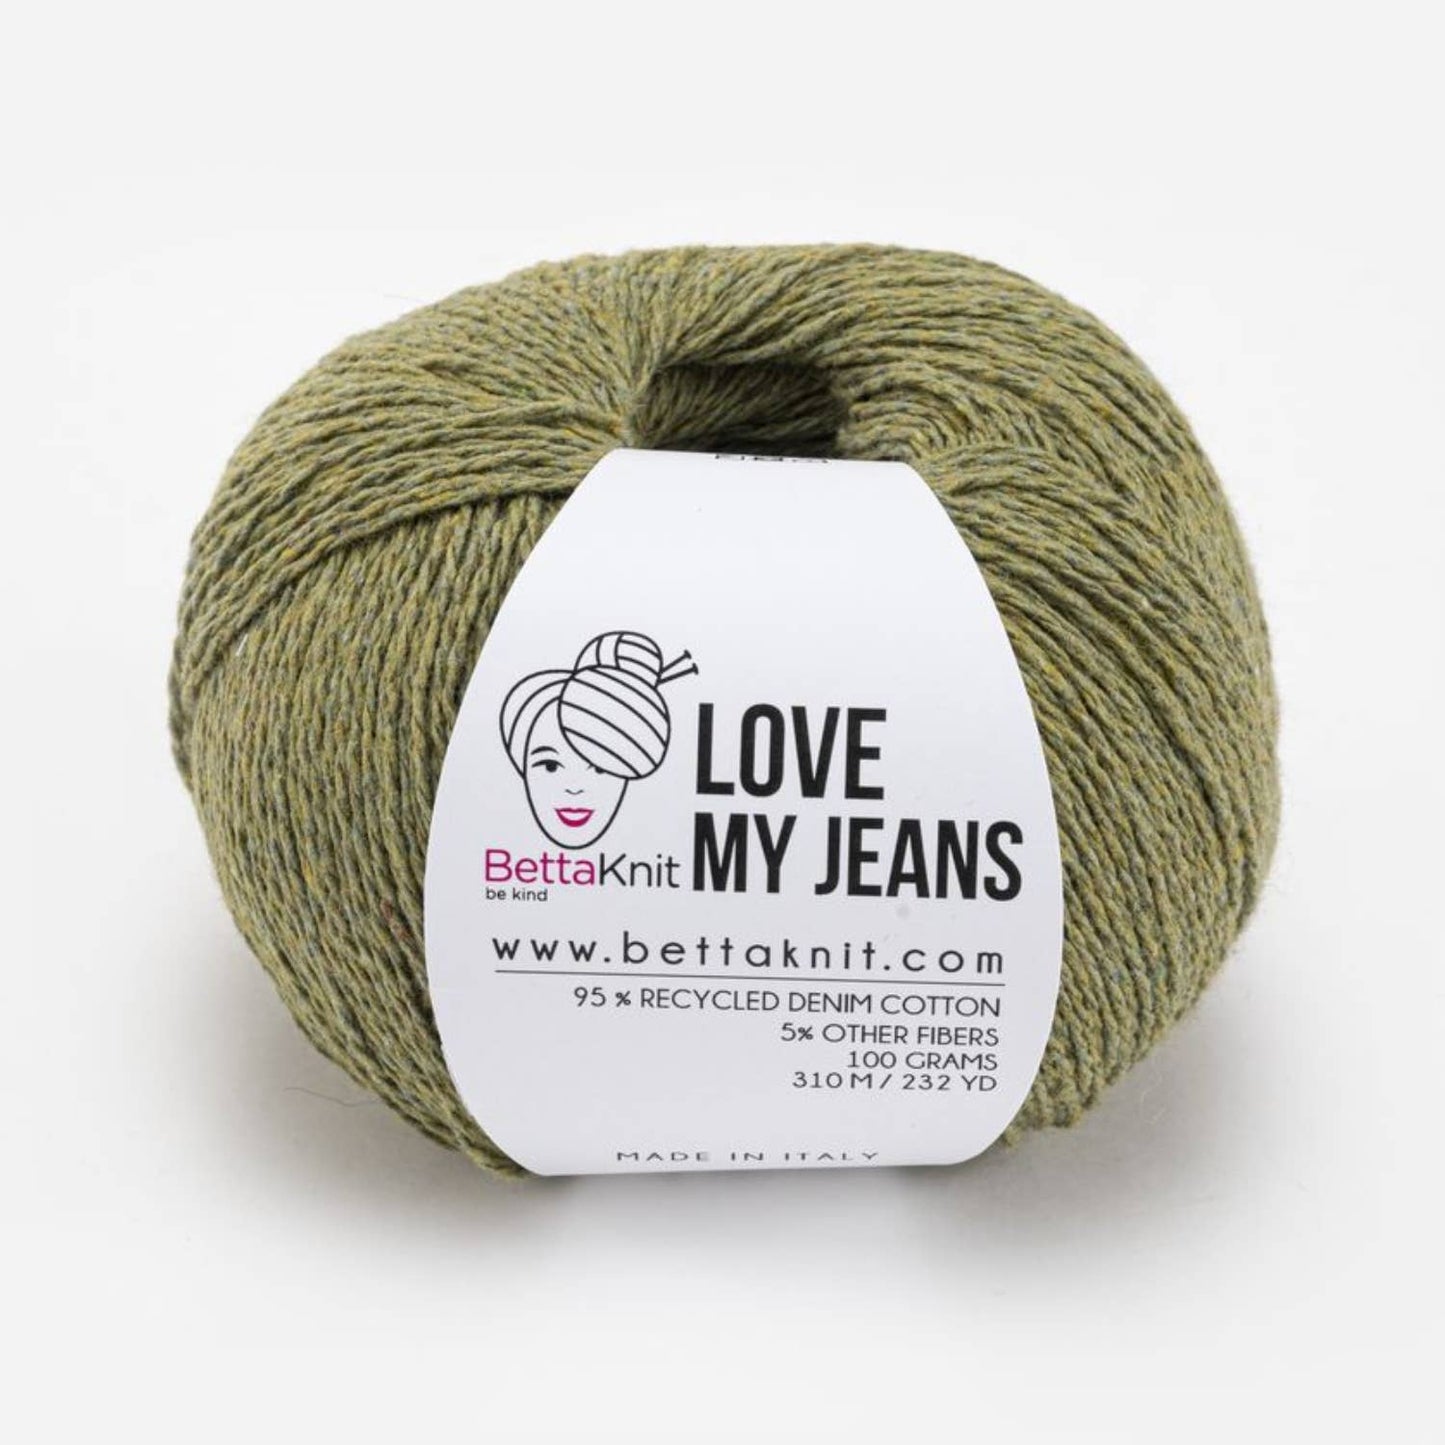 Love My Jeans, yarn obtained from the recycling of old jeans